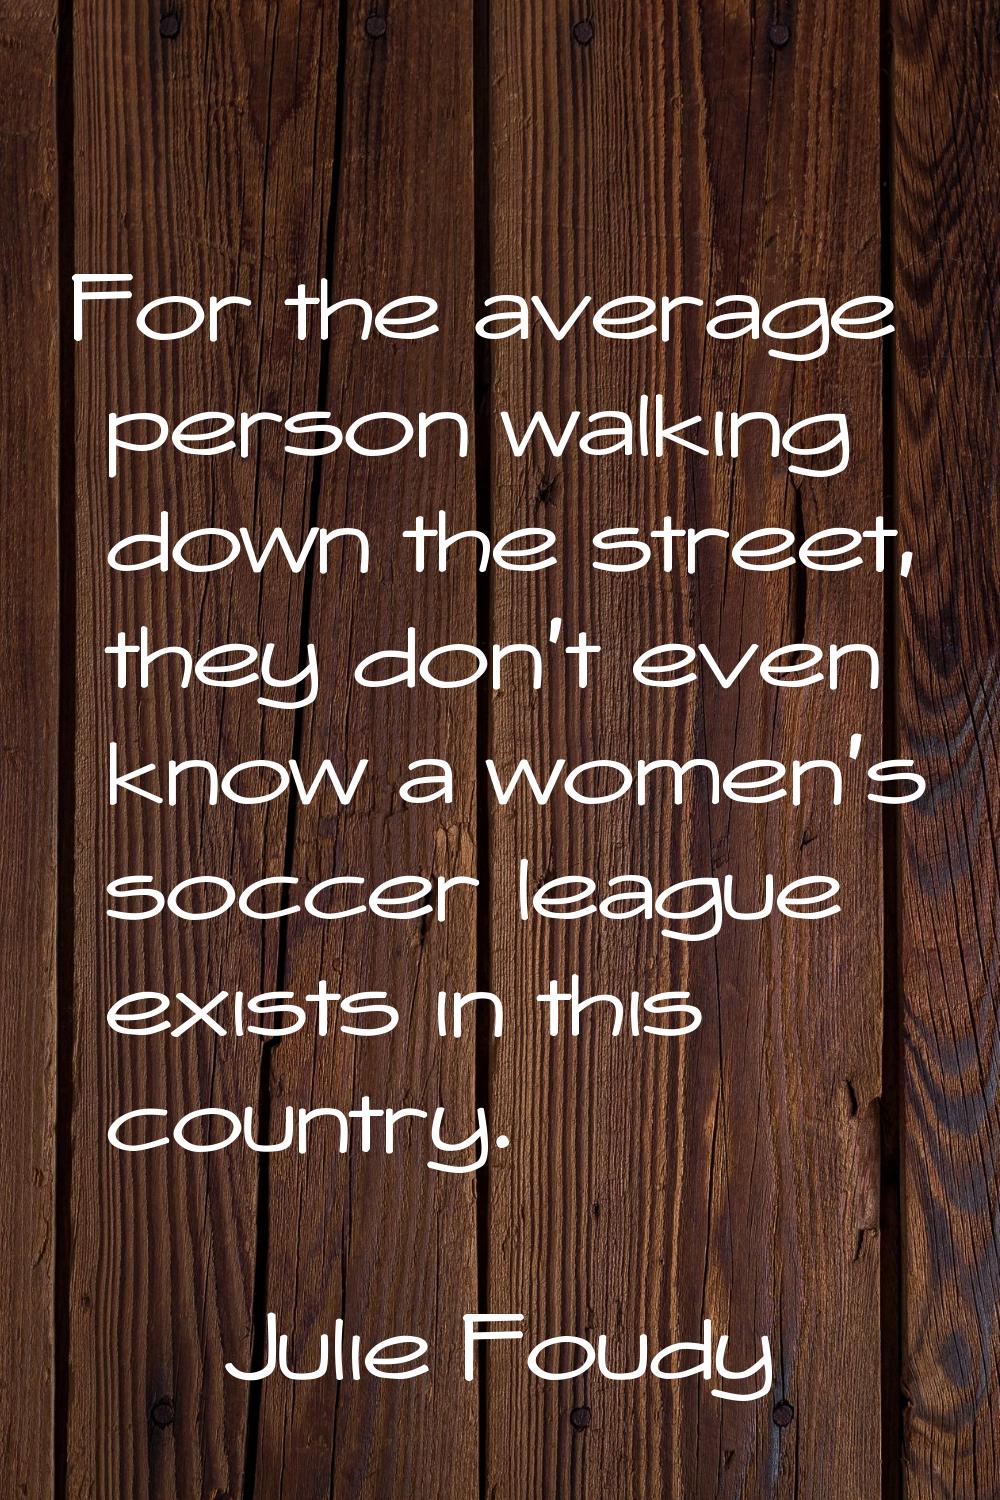 For the average person walking down the street, they don't even know a women's soccer league exists